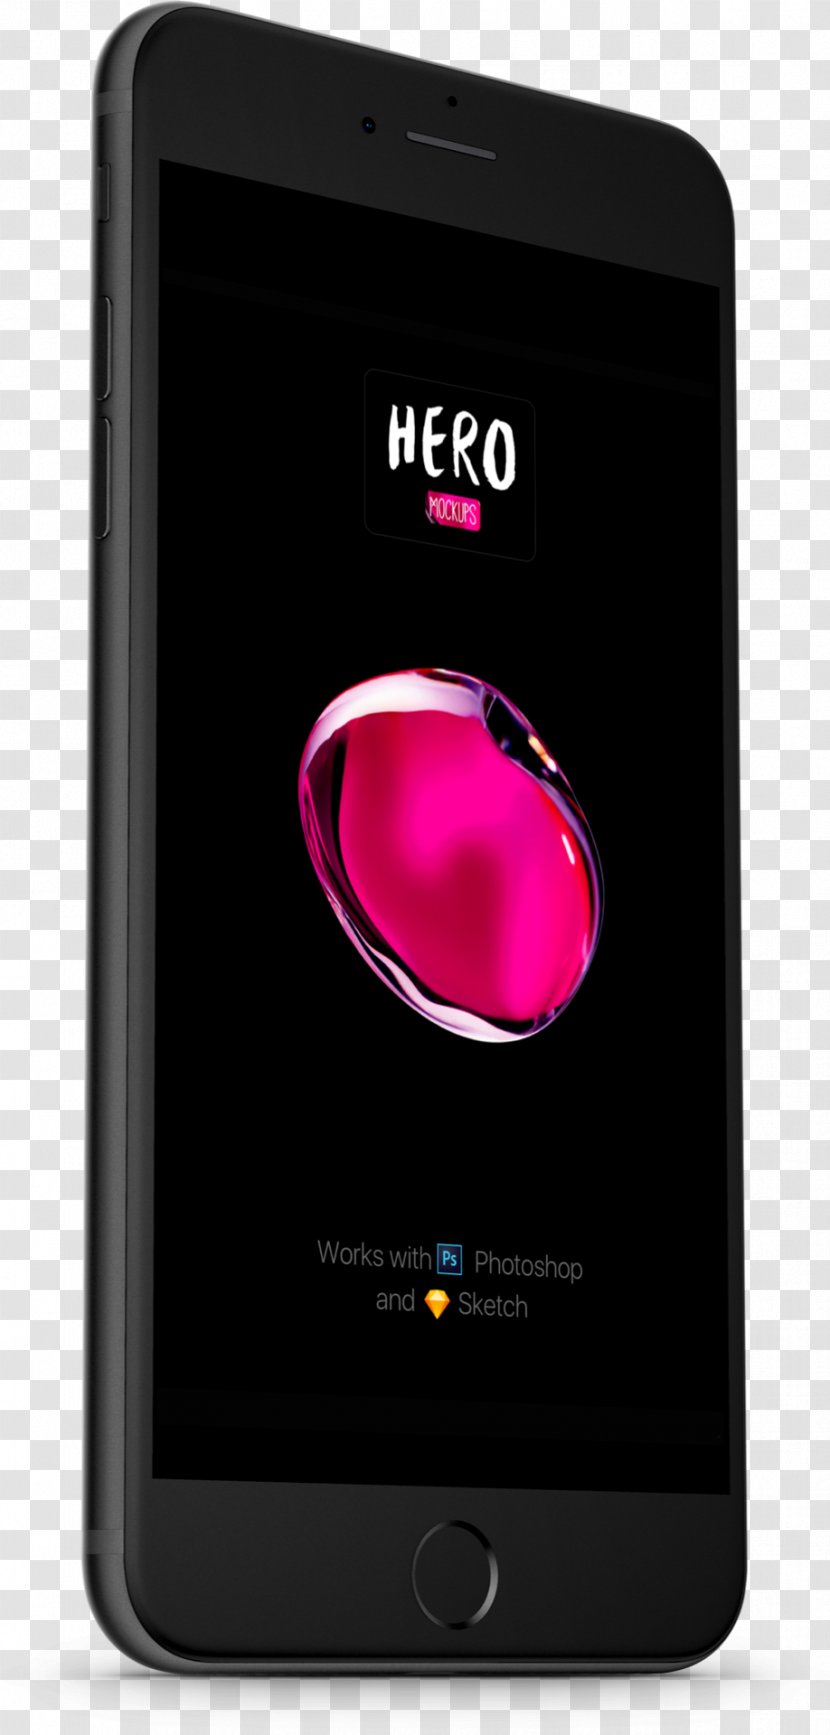 Feature Phone Smartphone Apple IPhone 7 Plus (32GB, Black) - Electronic Device - Iphone Mockup Sketch Transparent PNG